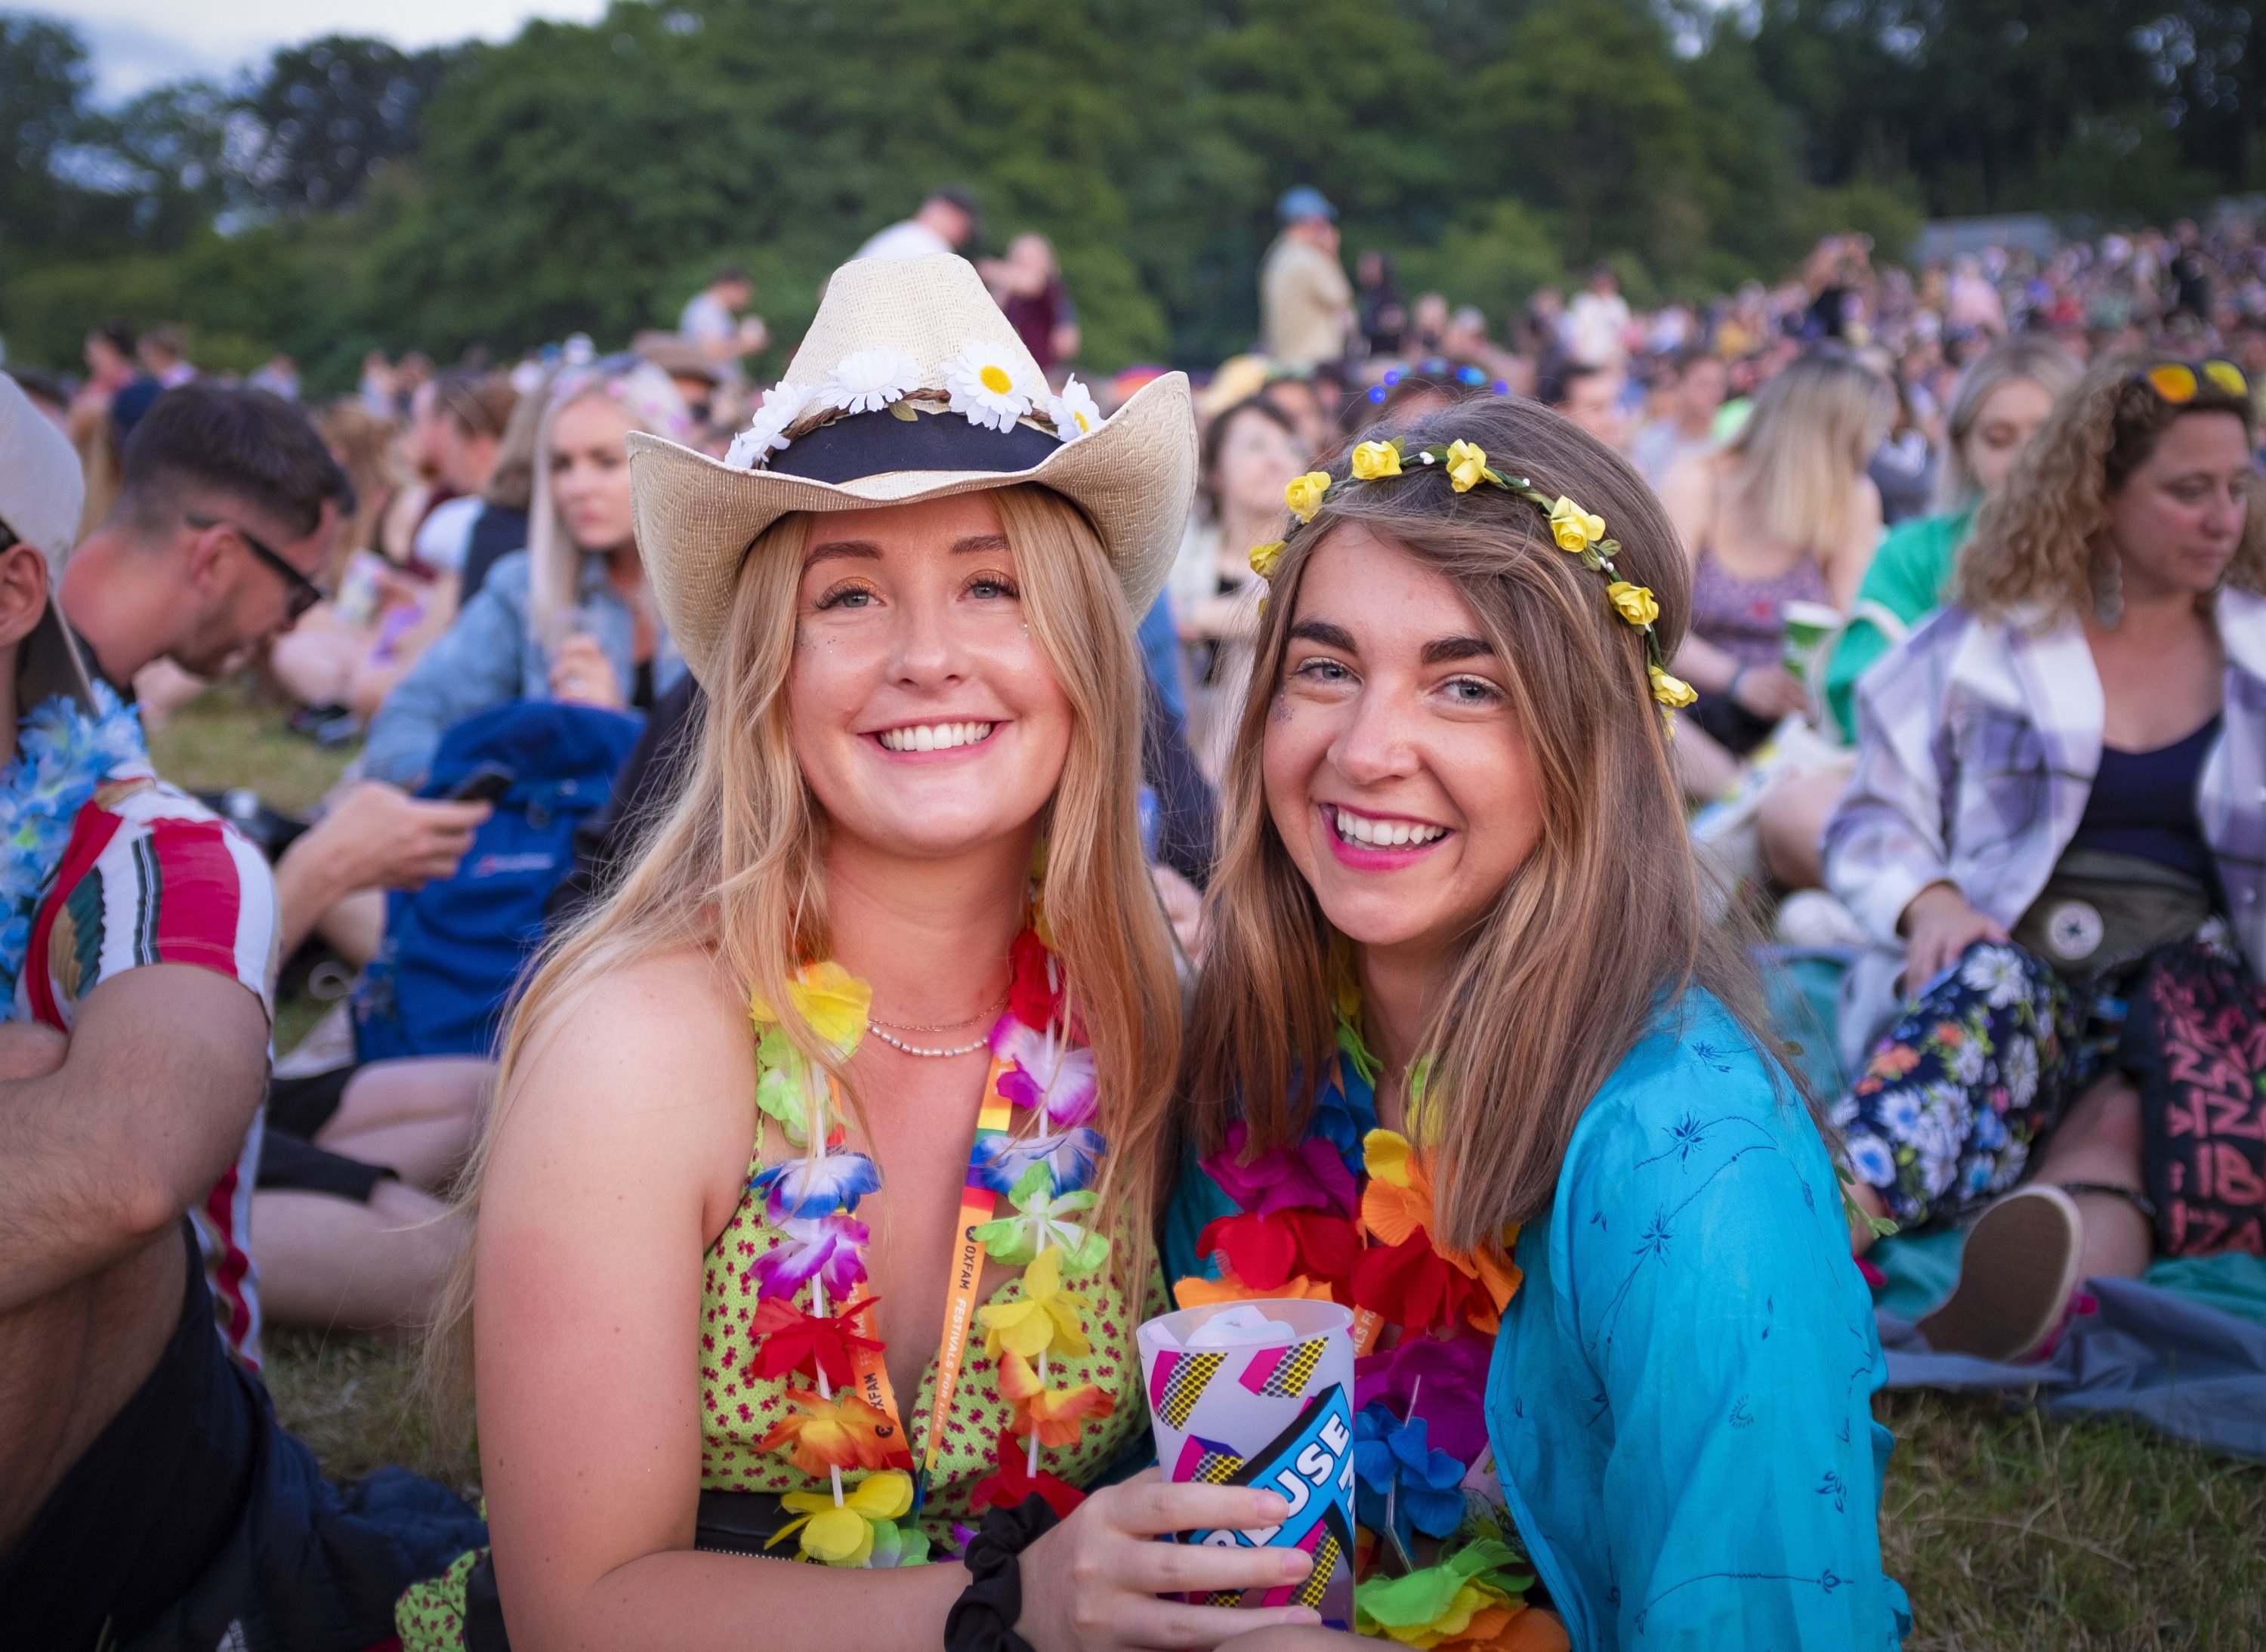 Eden Beirne, 26, and Izzi Gale, 25, pose for a photo on the first day of the Glastonbury Festival, Pilton, Britain, June 22, 2022. (EPA)